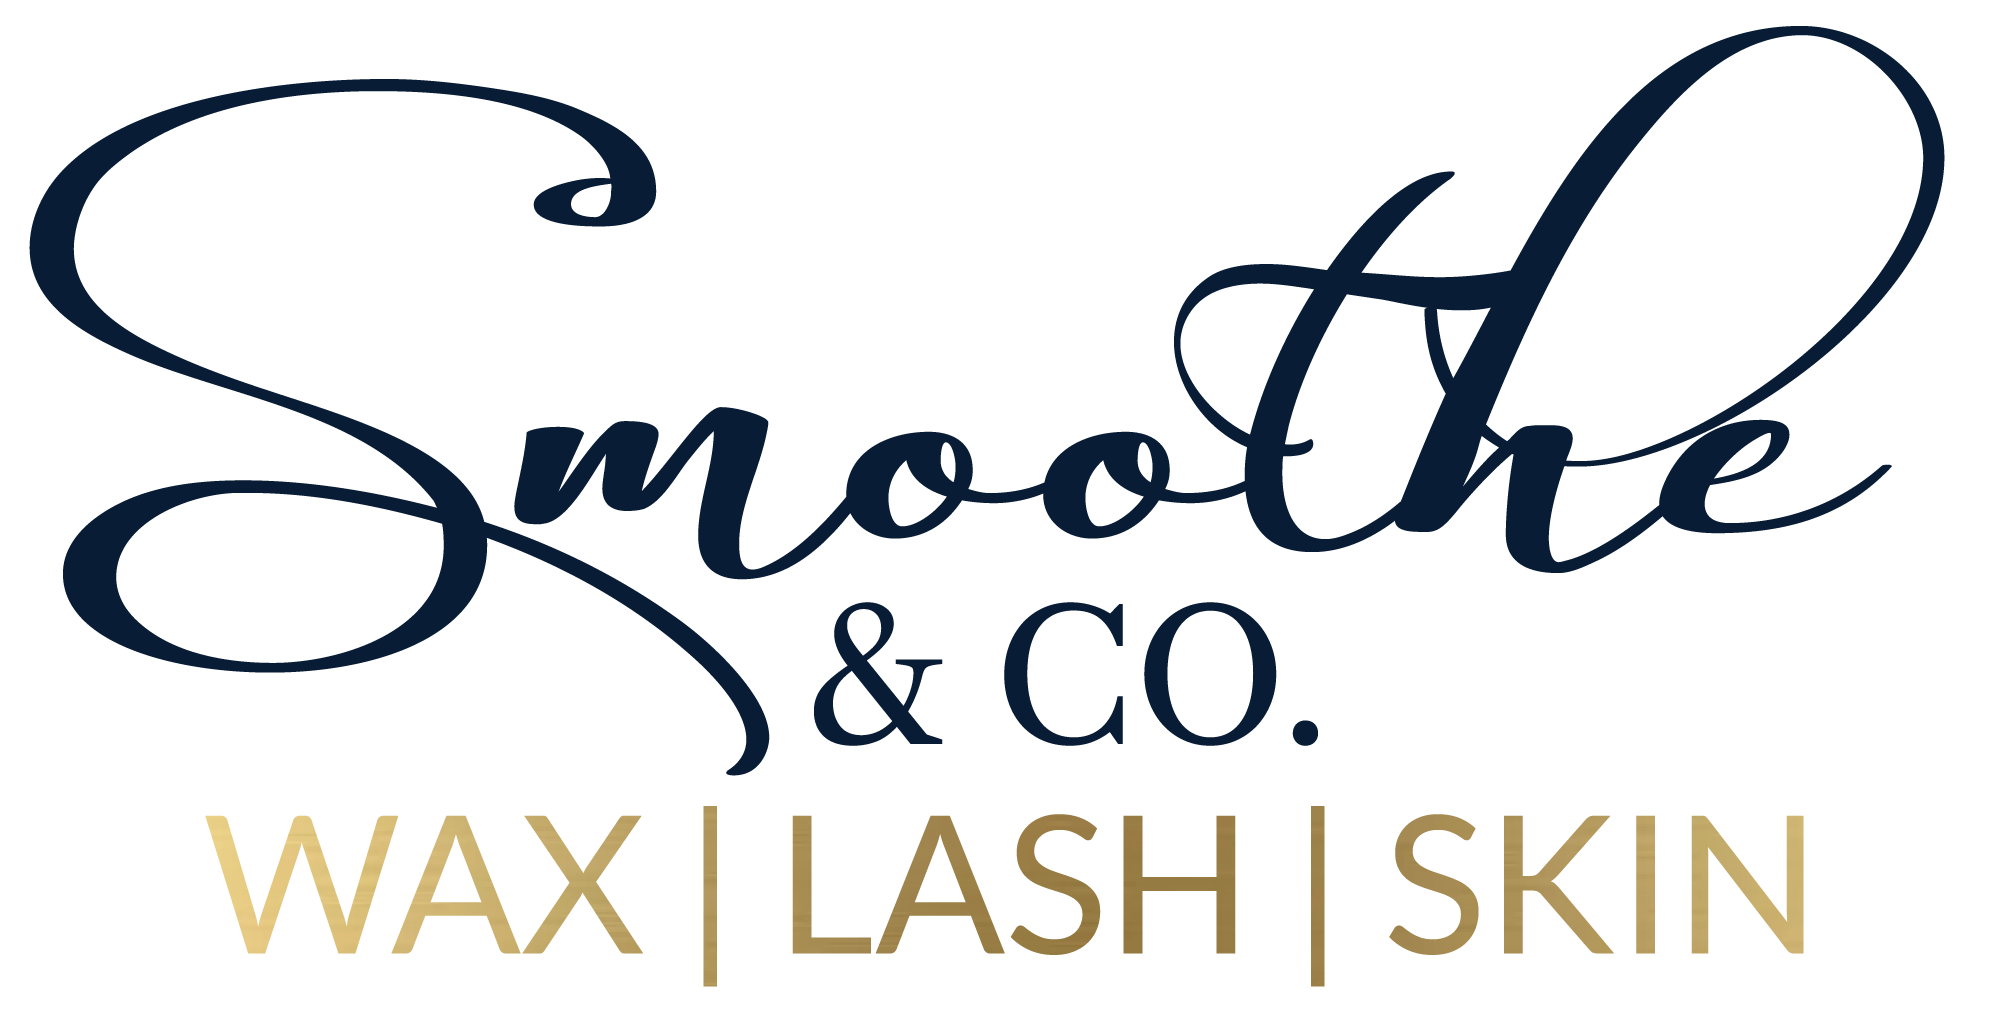 Smoothe & Co Raleigh NC Waxing Lashes and Skincare